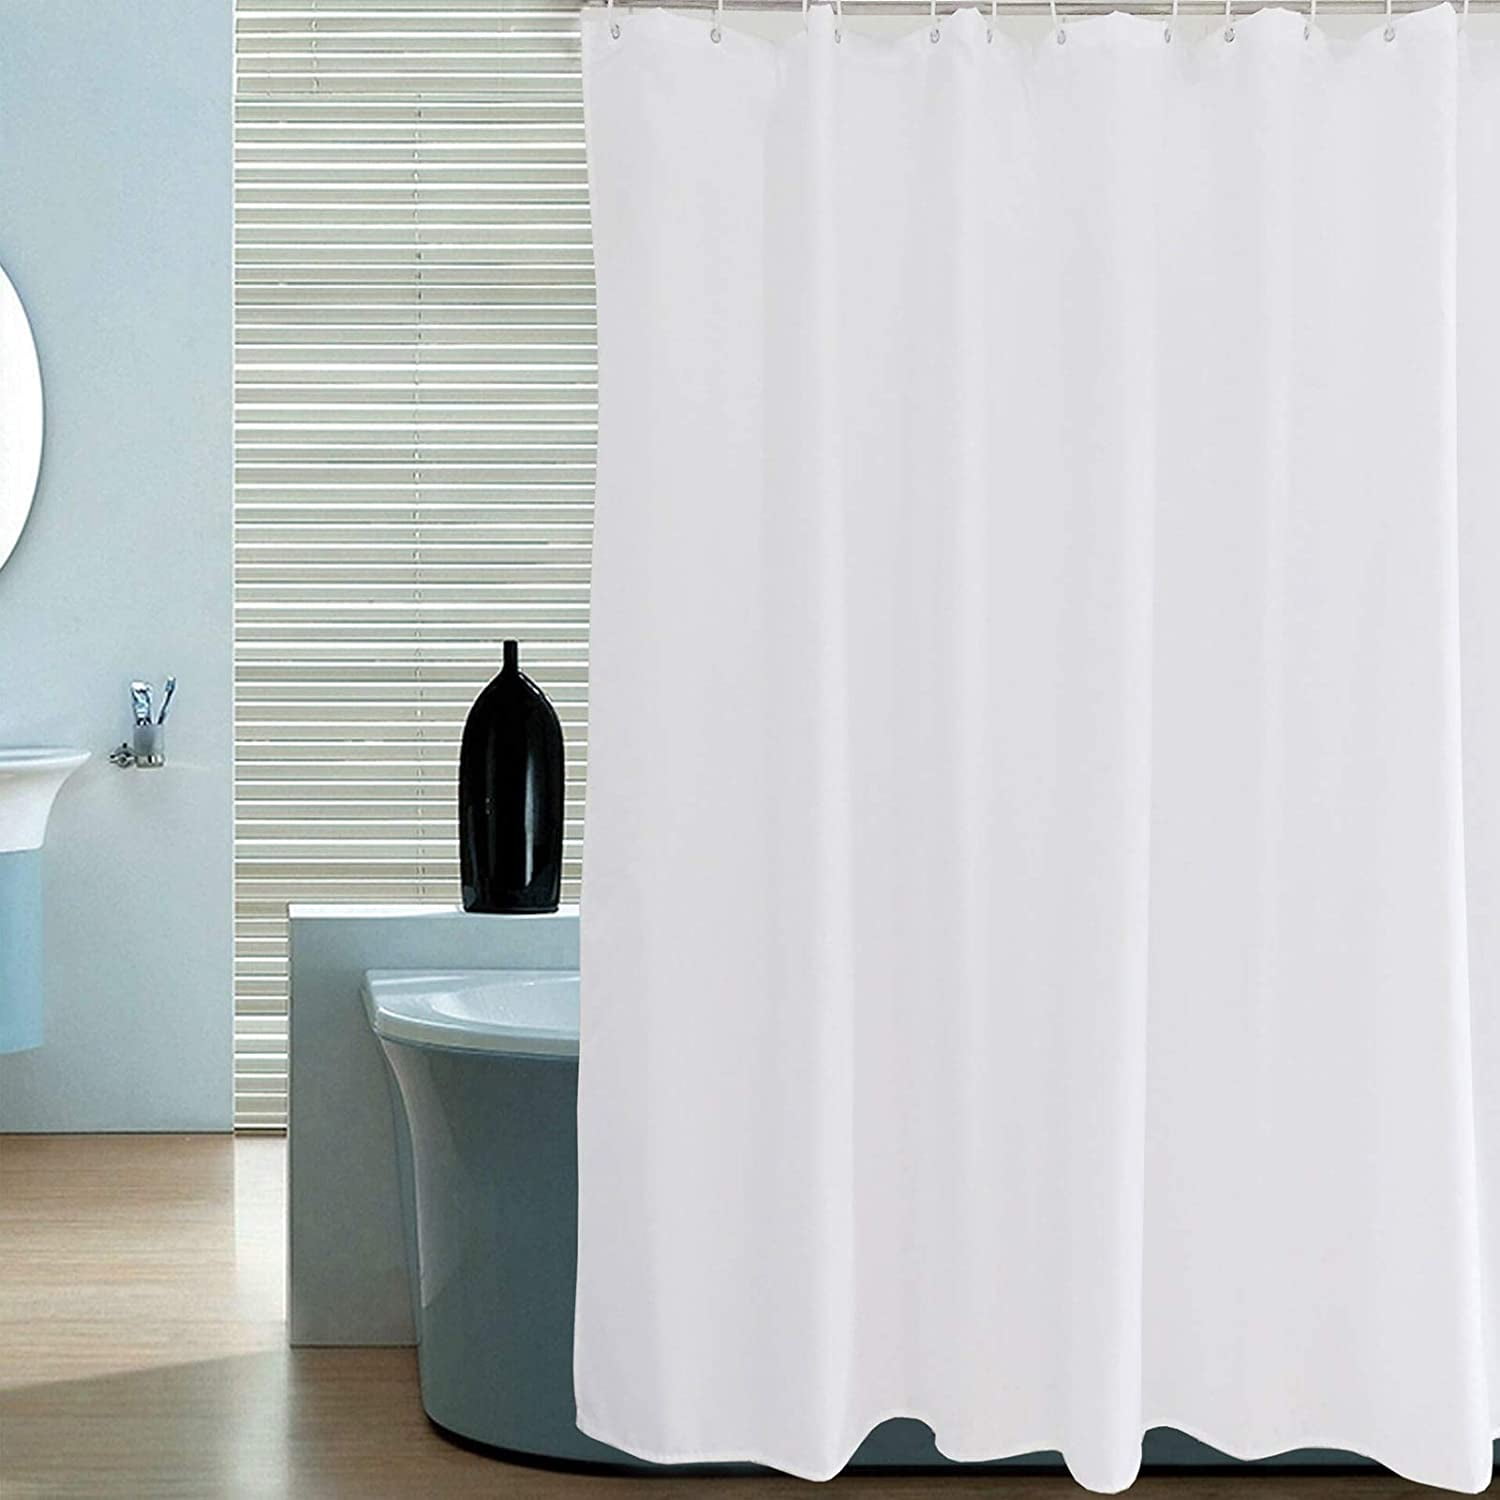 Niuta Shower Liner Standard, Does Cotton Shower Curtains Need Liner